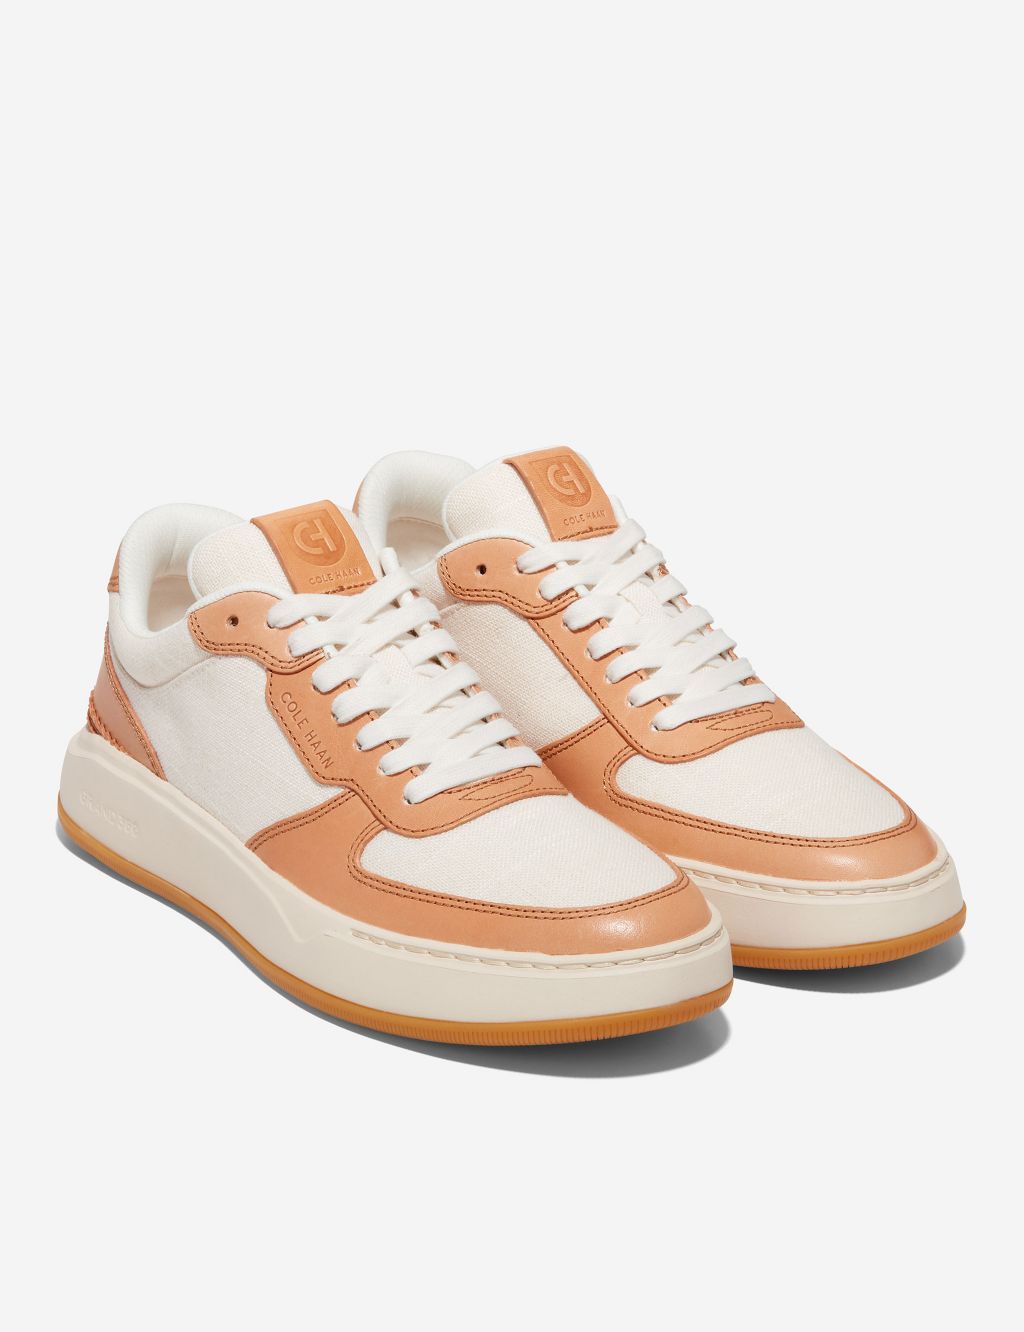 GrandPro Crossover Leather Lace Up Trainers image 2